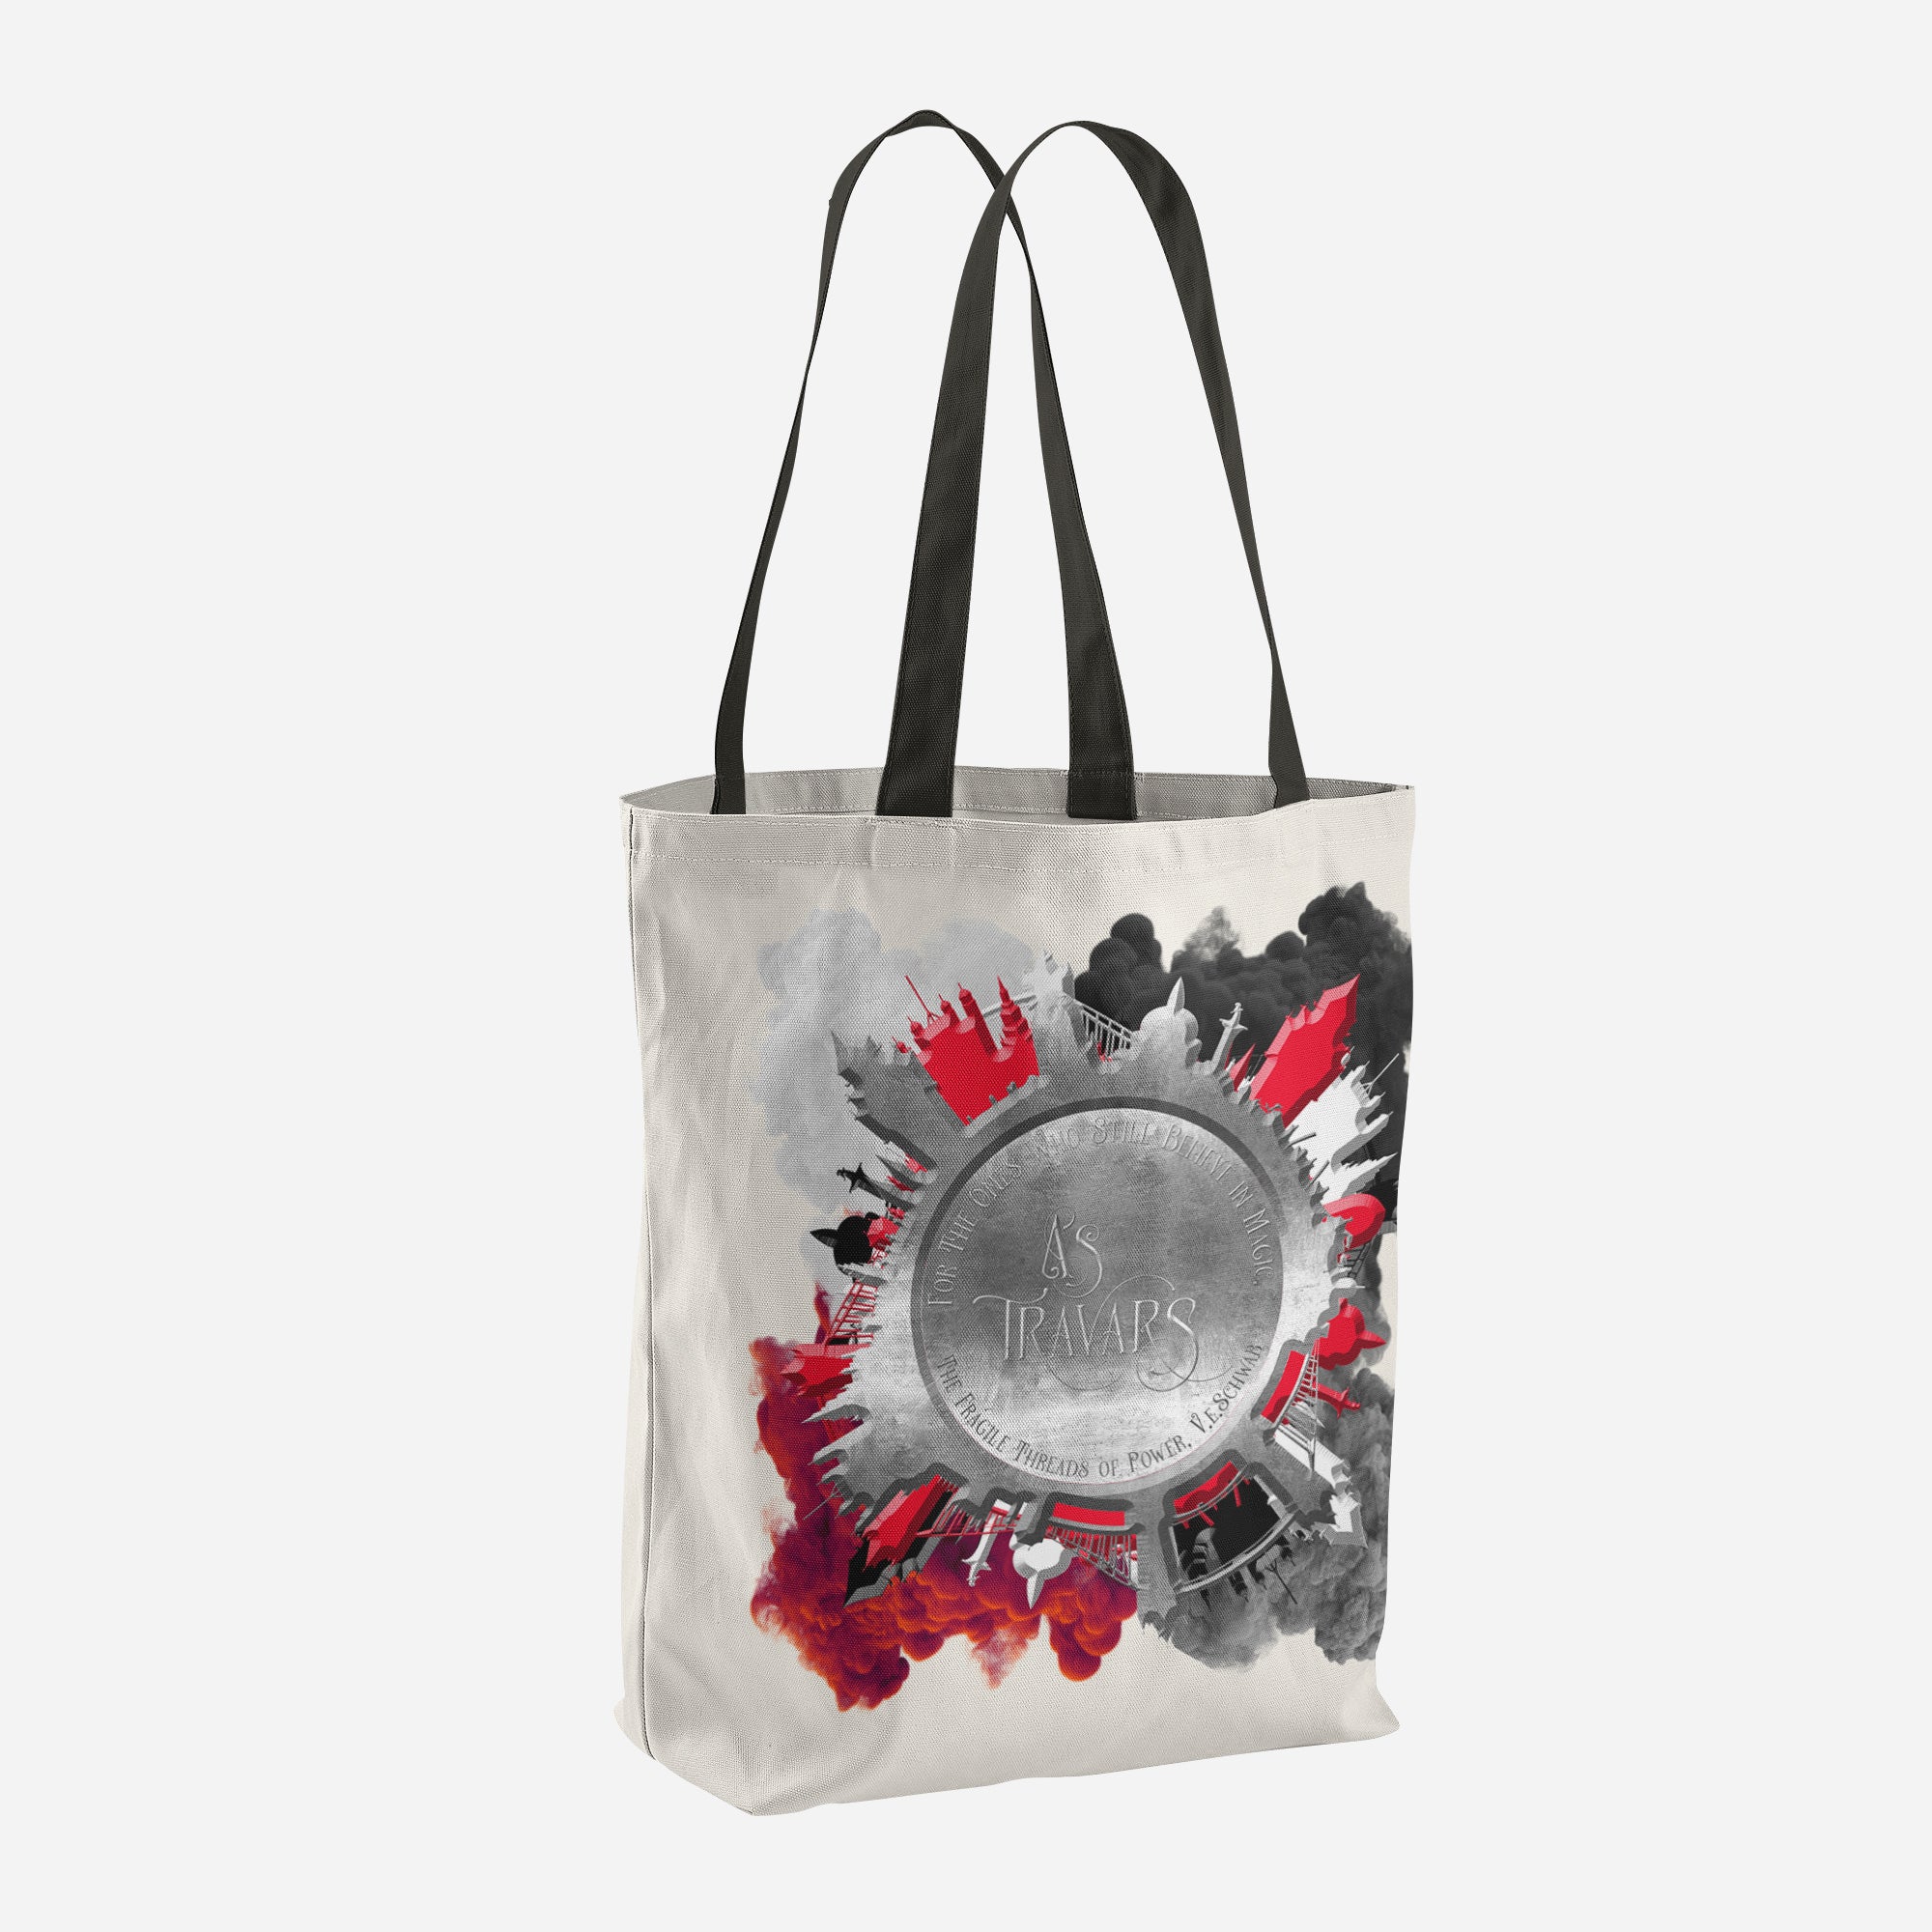 As Travars. The Fragile Threads of Power Tote Bag